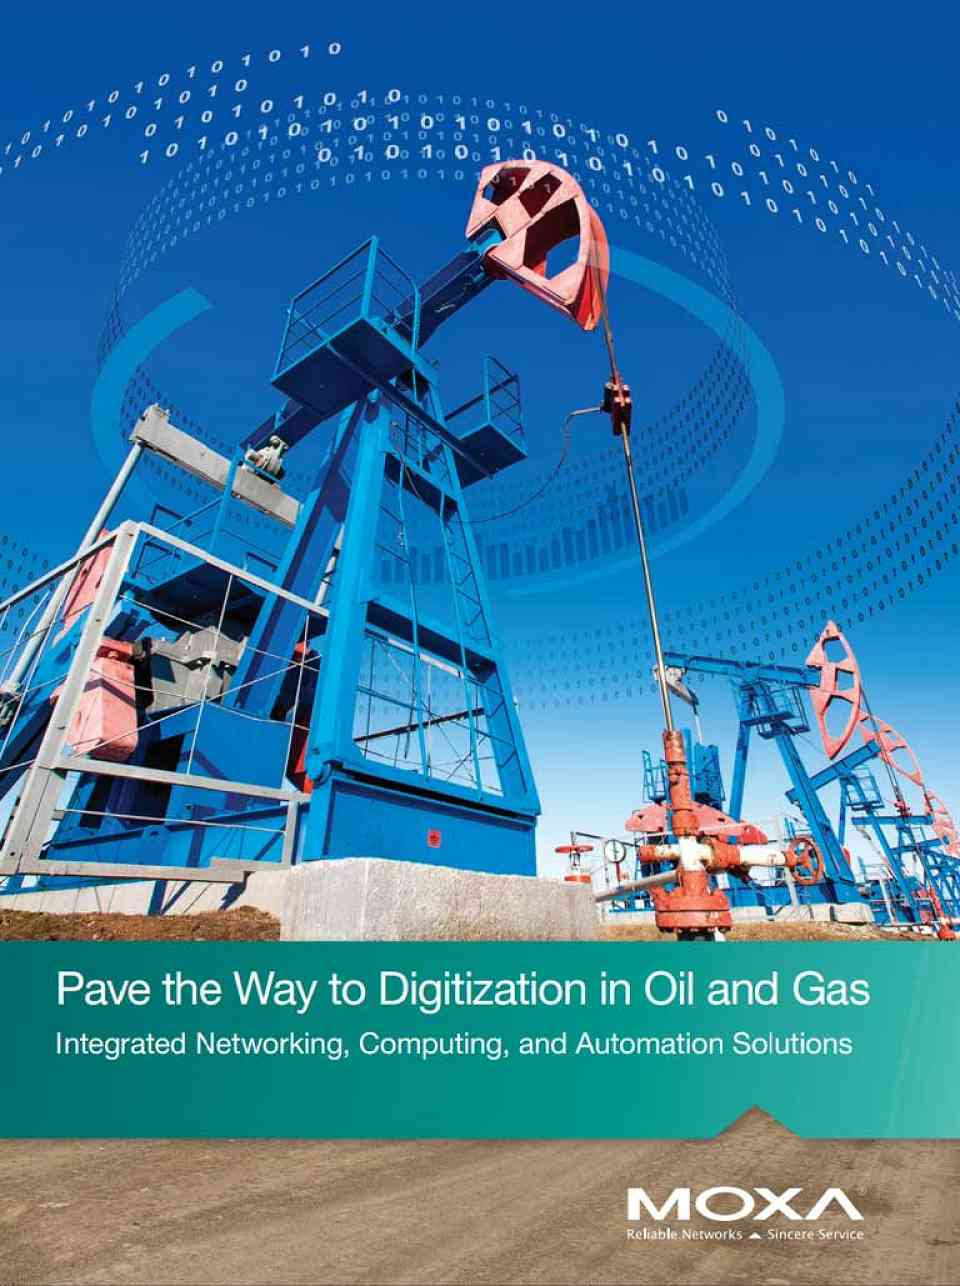 Pave the Way to Digitization in Oil and Gas Catalogue Cover